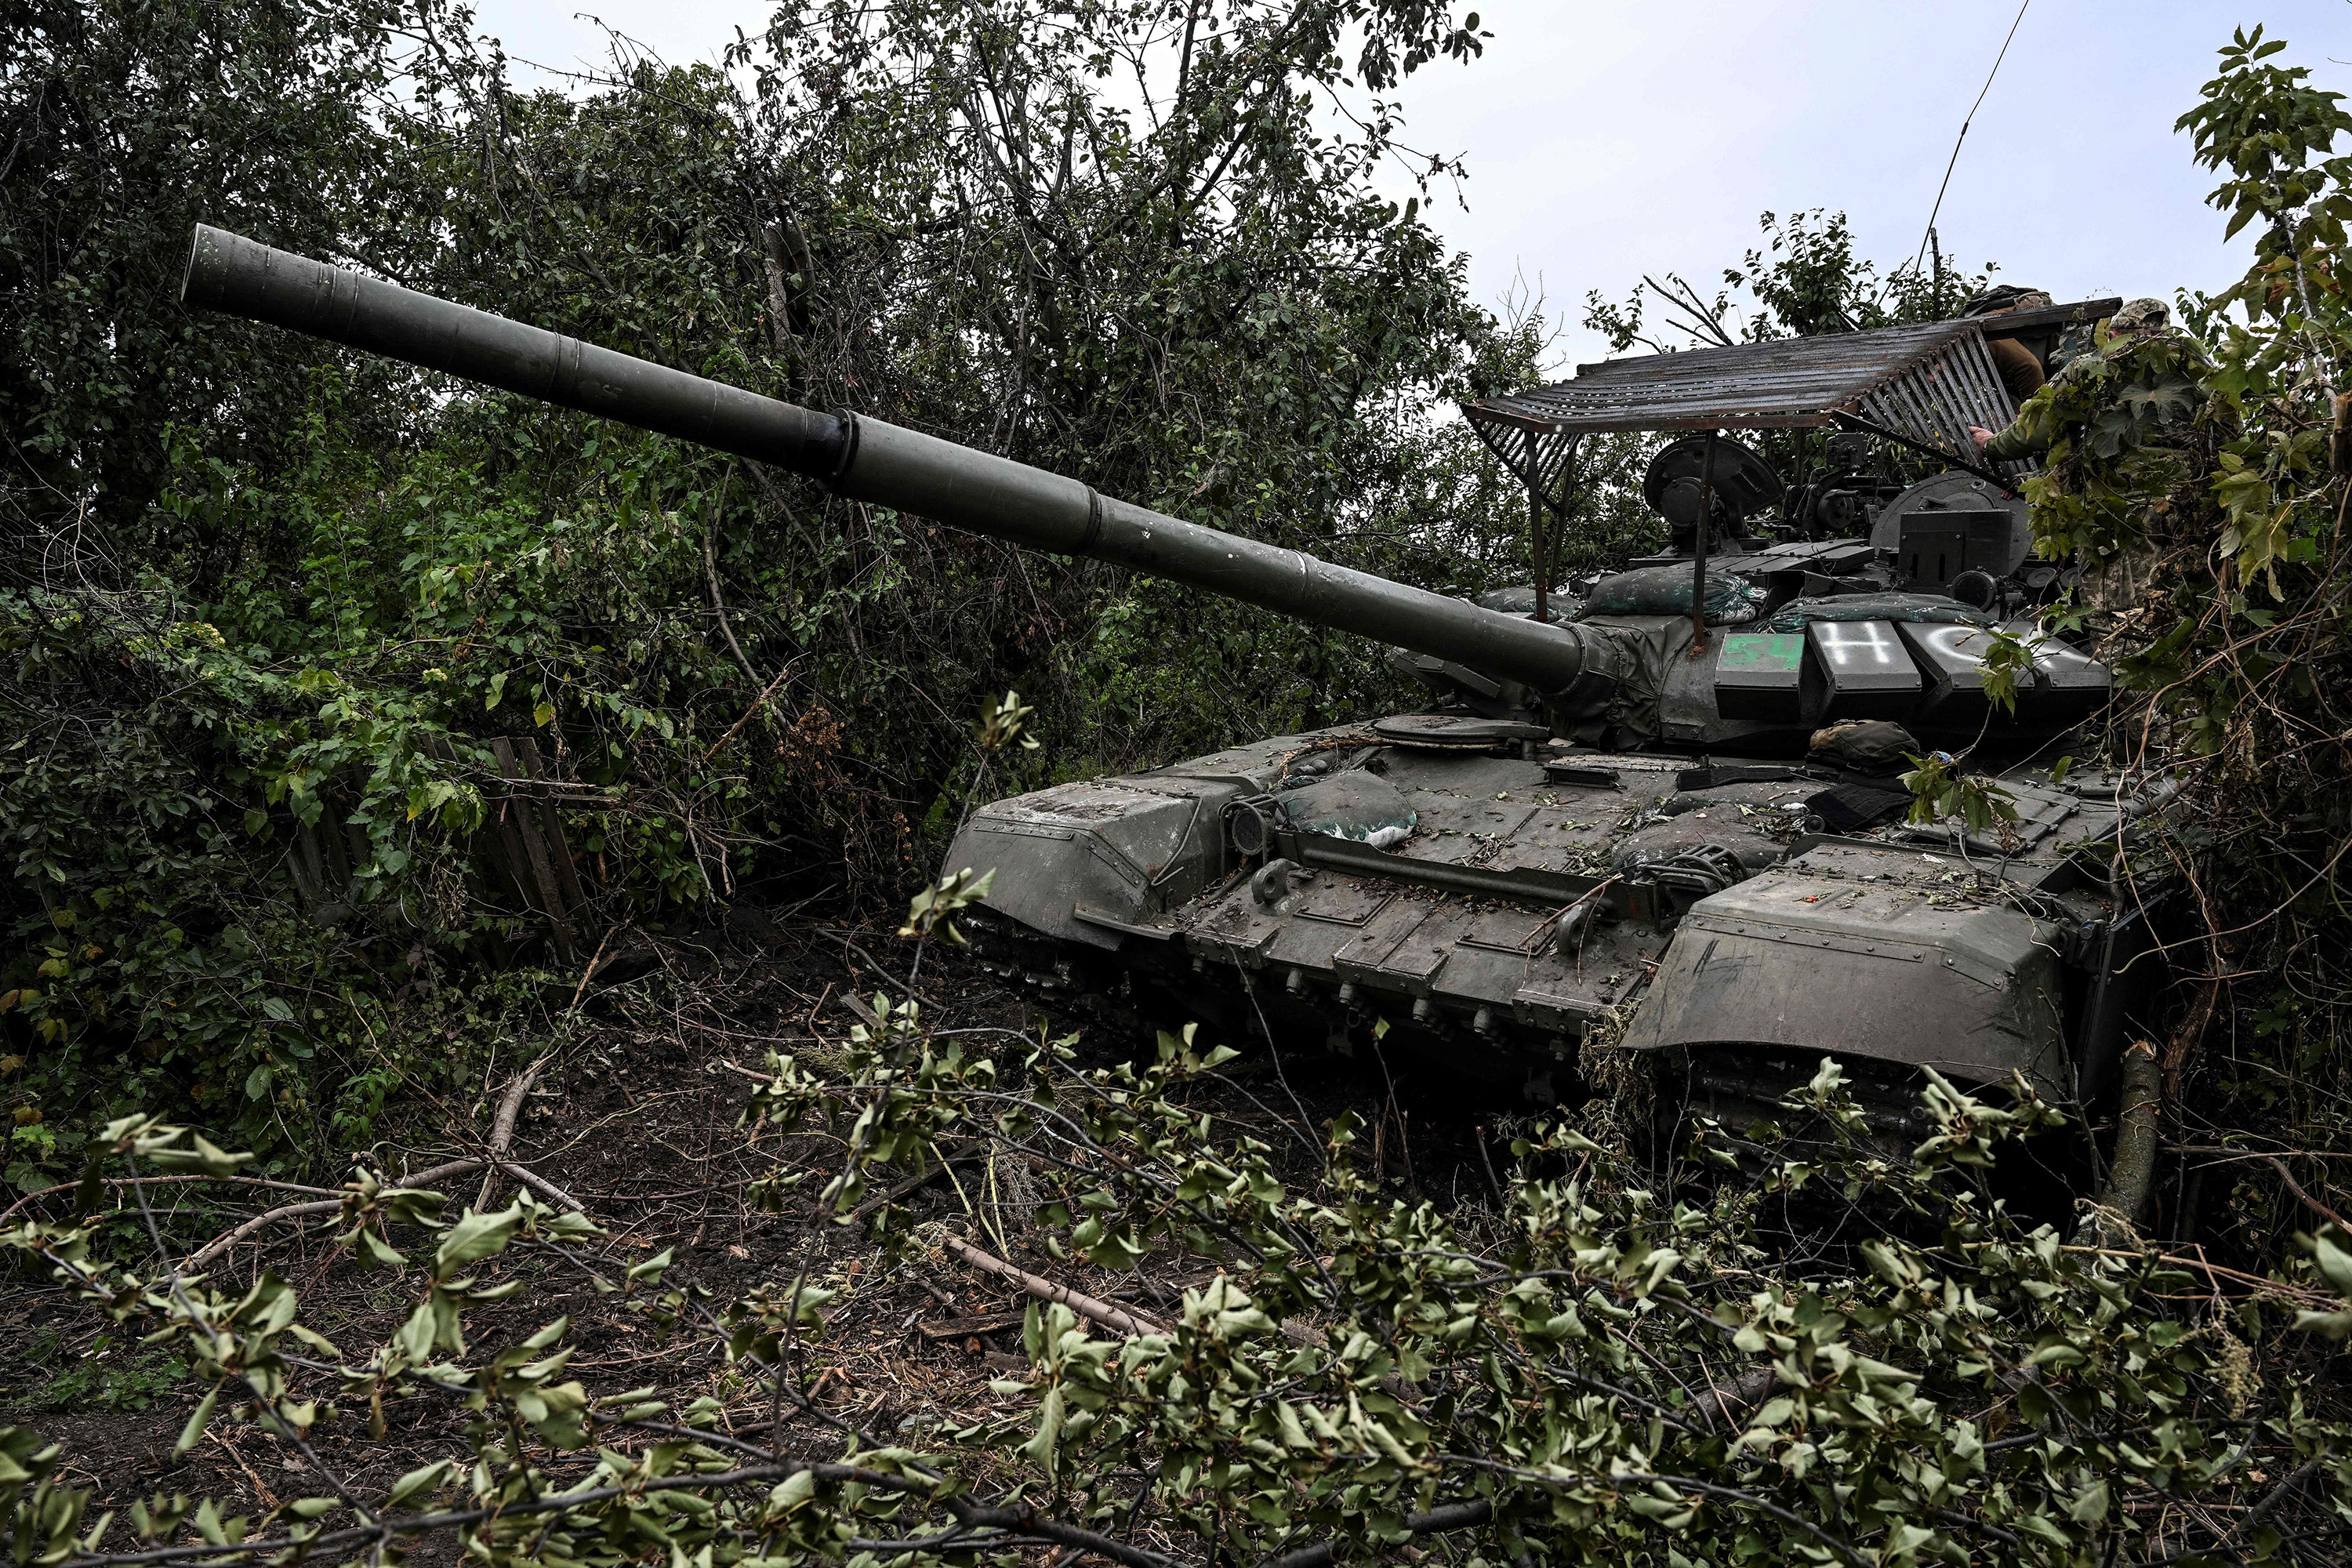 An abandoned Russian tank is seen in a village on the outskirts of Izyum in the Kharkiv region of Ukraine on September 11.